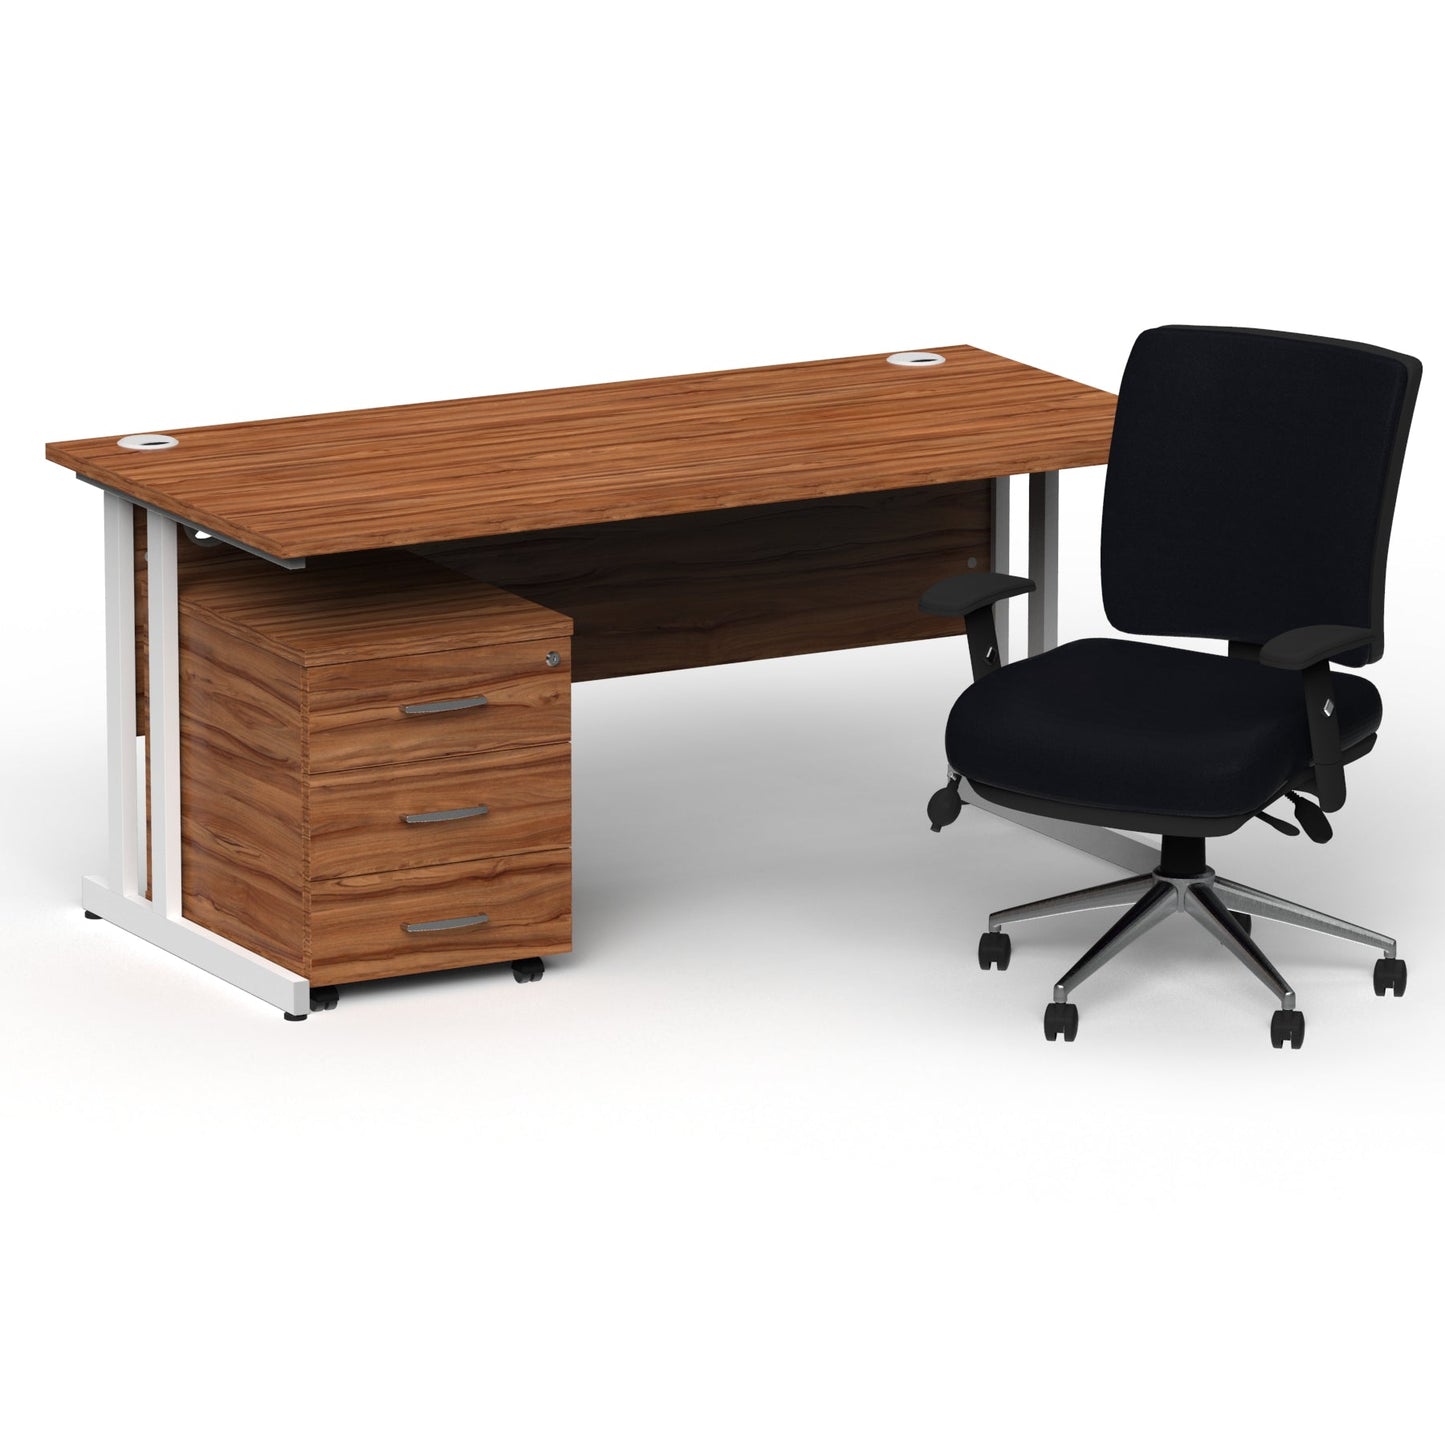 Impulse 1800mm Cantilever Straight Desk With Mobile Pedestal and Chiro Medium Back Black Operator Chair